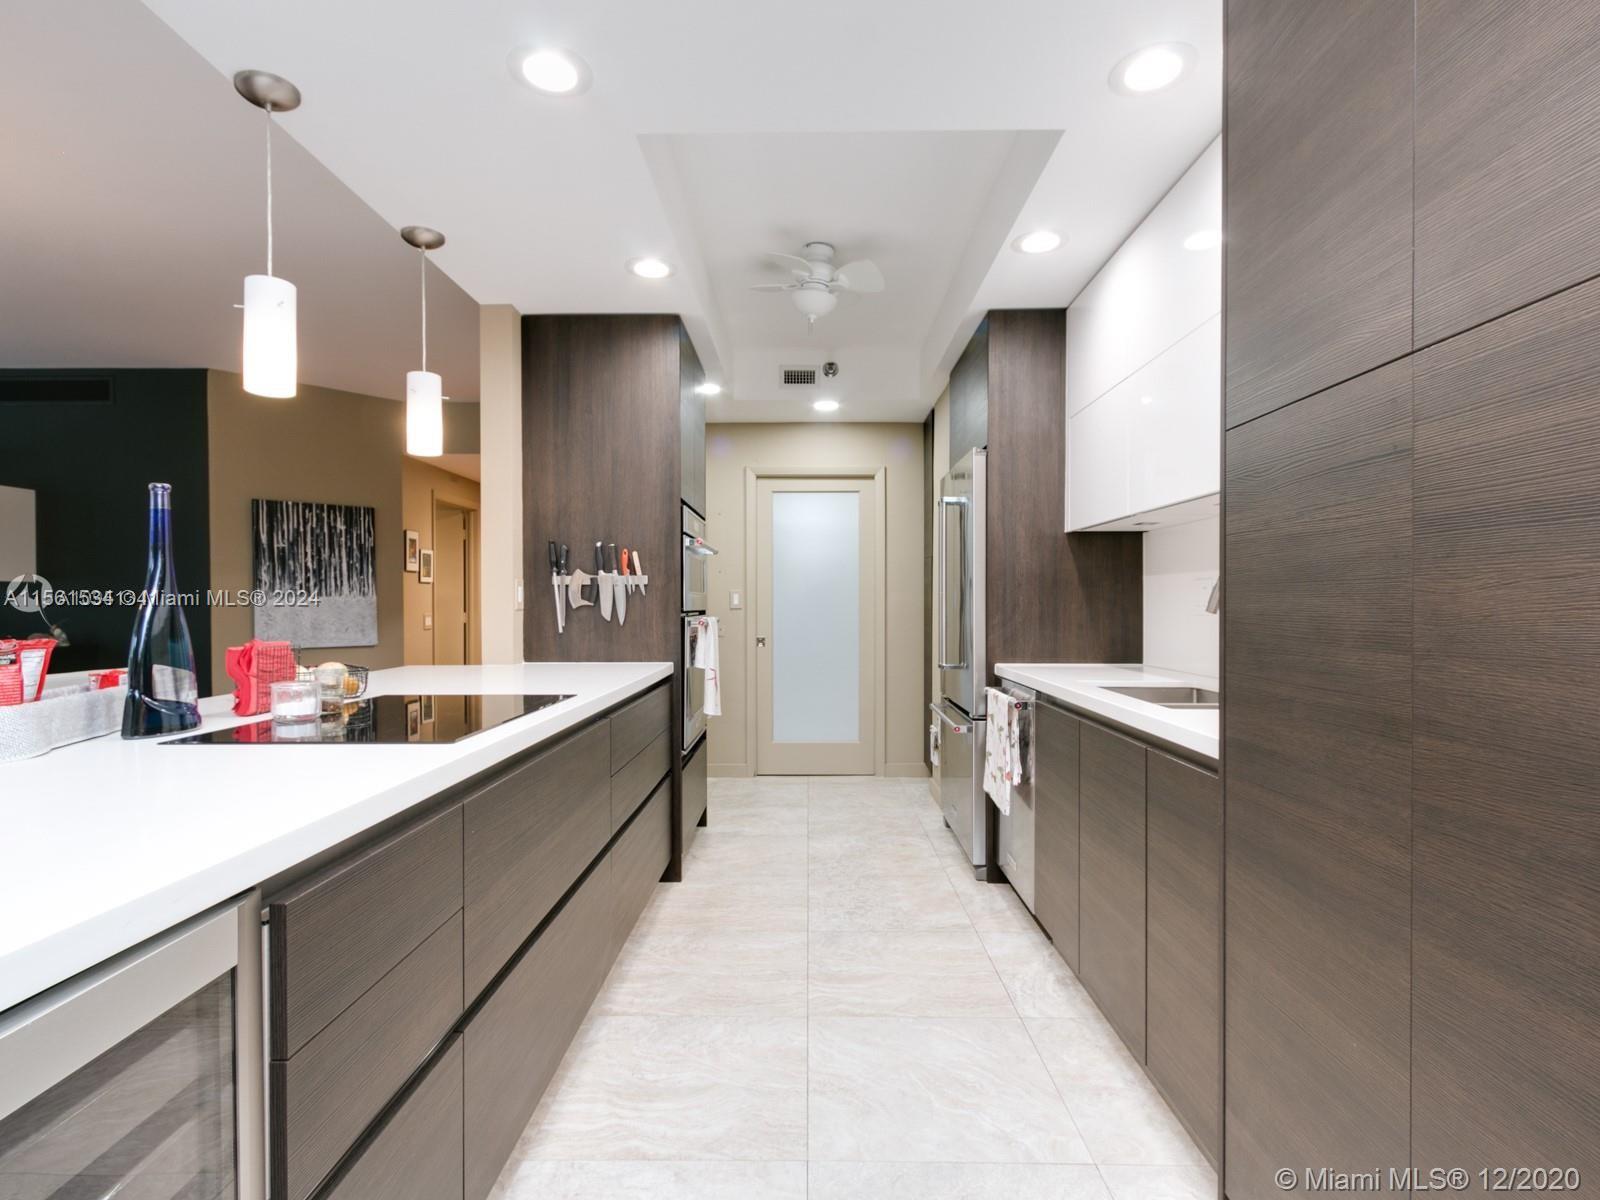 a large kitchen with a large counter top cabinets and stainless steel appliances